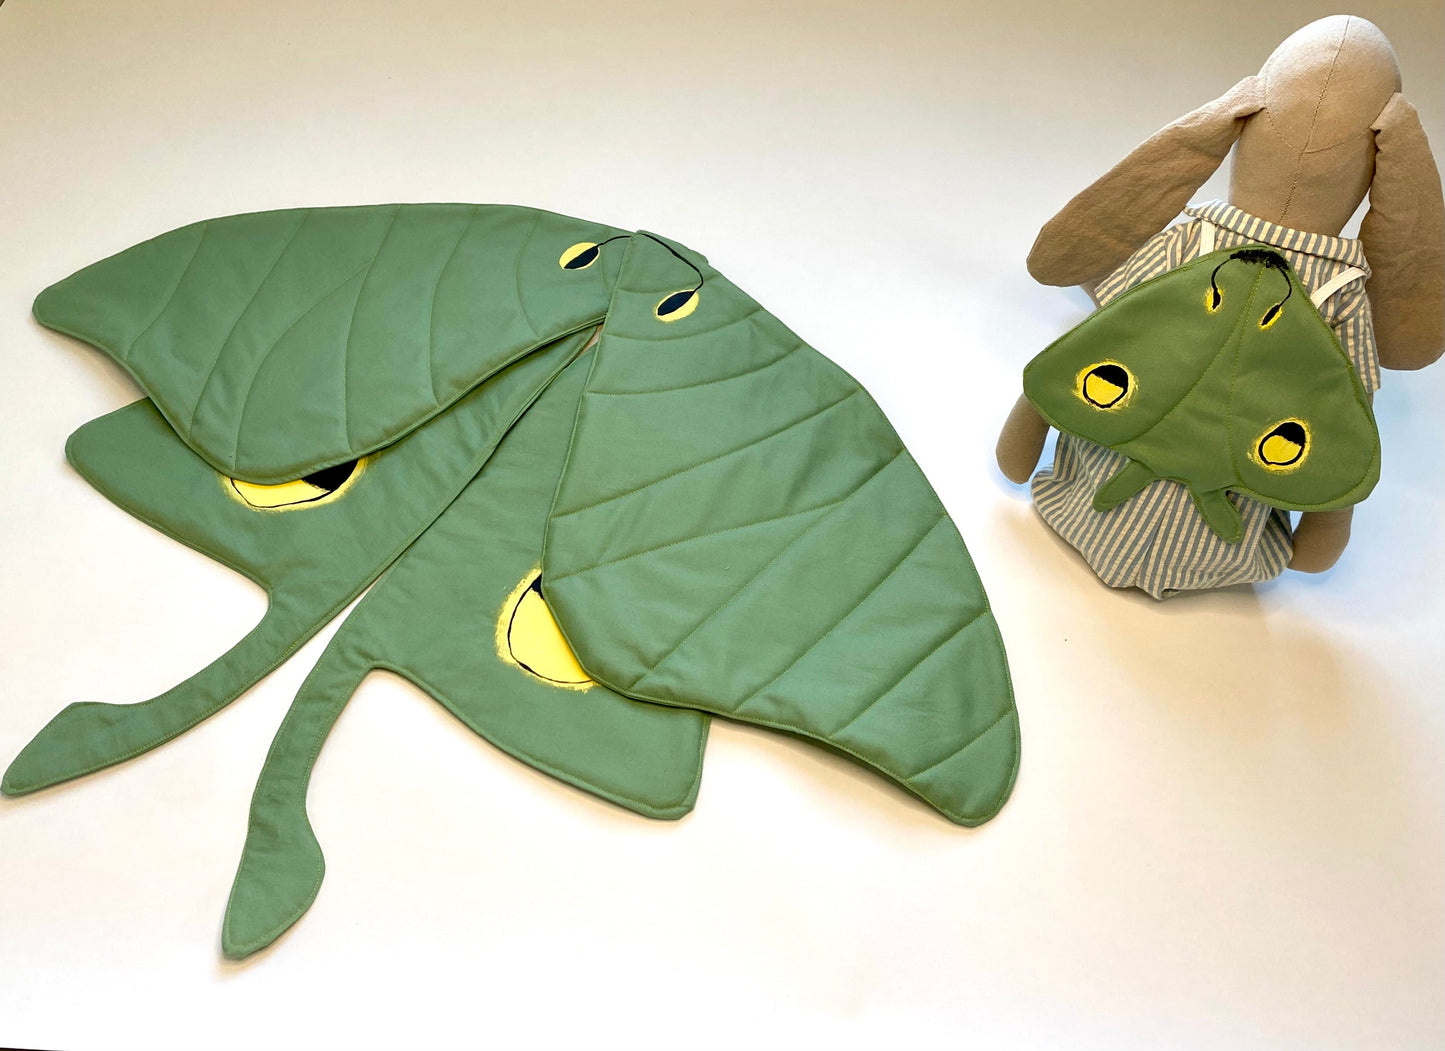 Green luna moth wings for child and matching wings for doll